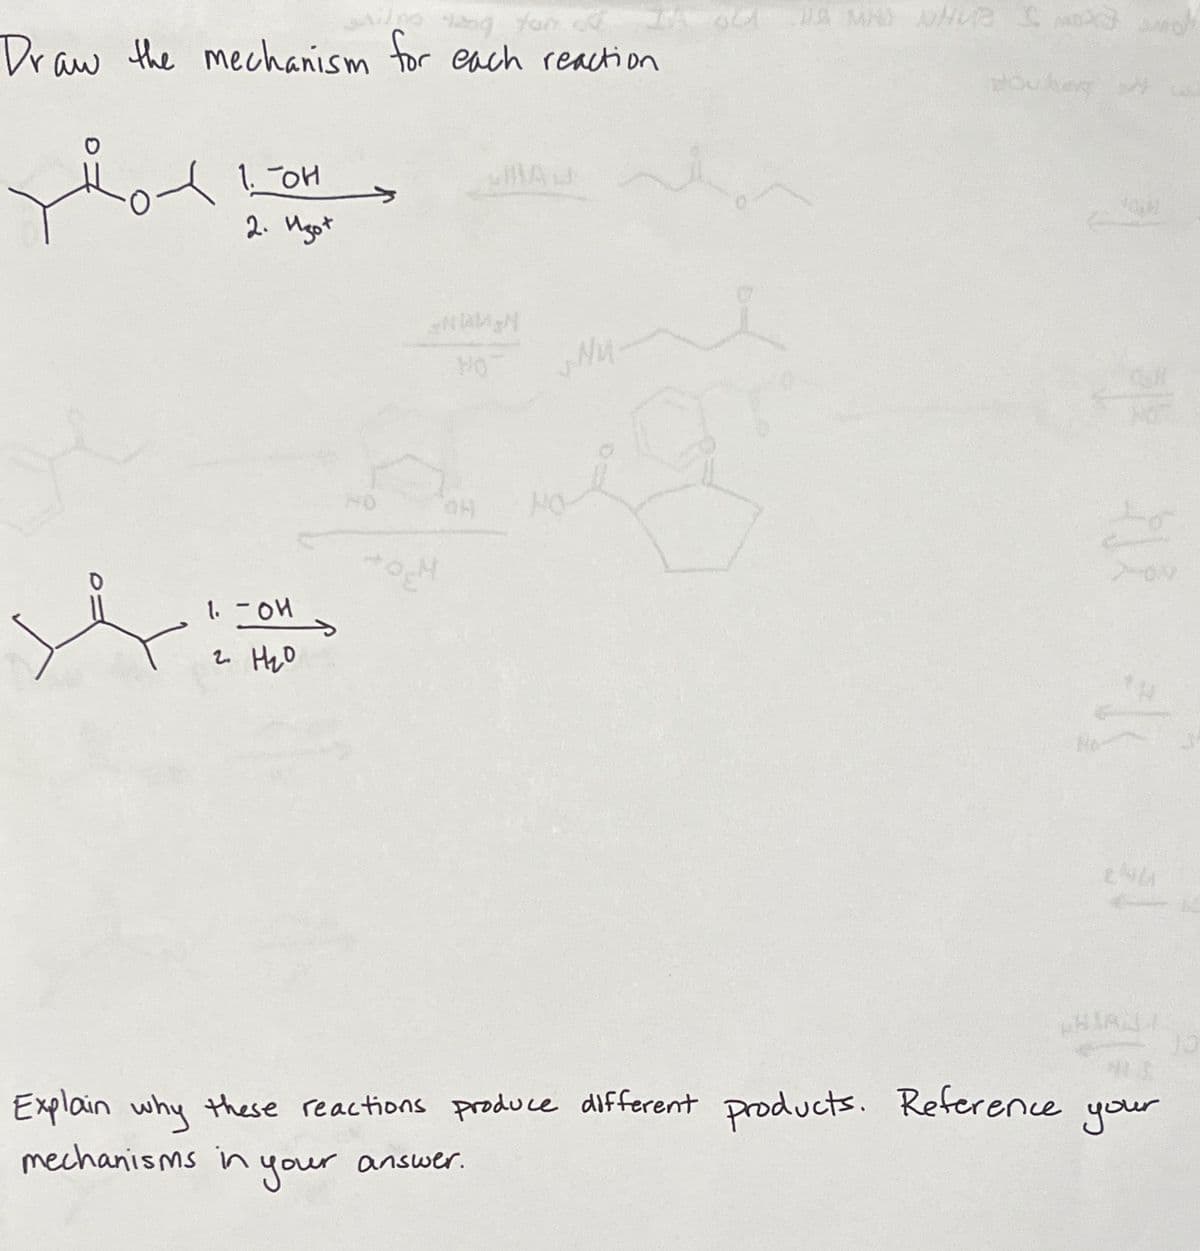 ton
Draw the mechanism for each reaction
་
1. он
MAJ
2. Ugot
1.-04
2. H₂0
HO
Nu
HO
OH HO
244
S
Explain why these reactions produce different products. Reference
mechanisms in
in your
answer.
your